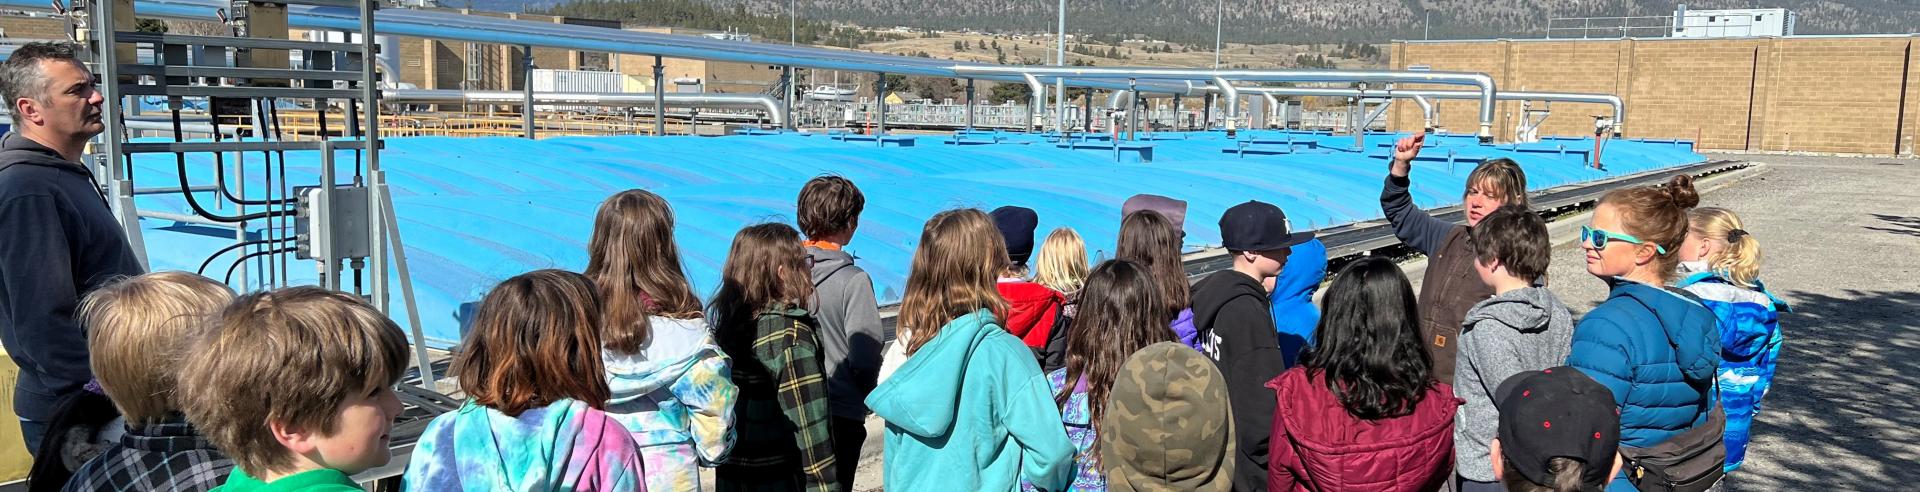 School tour of Wastewater Treatment Plant